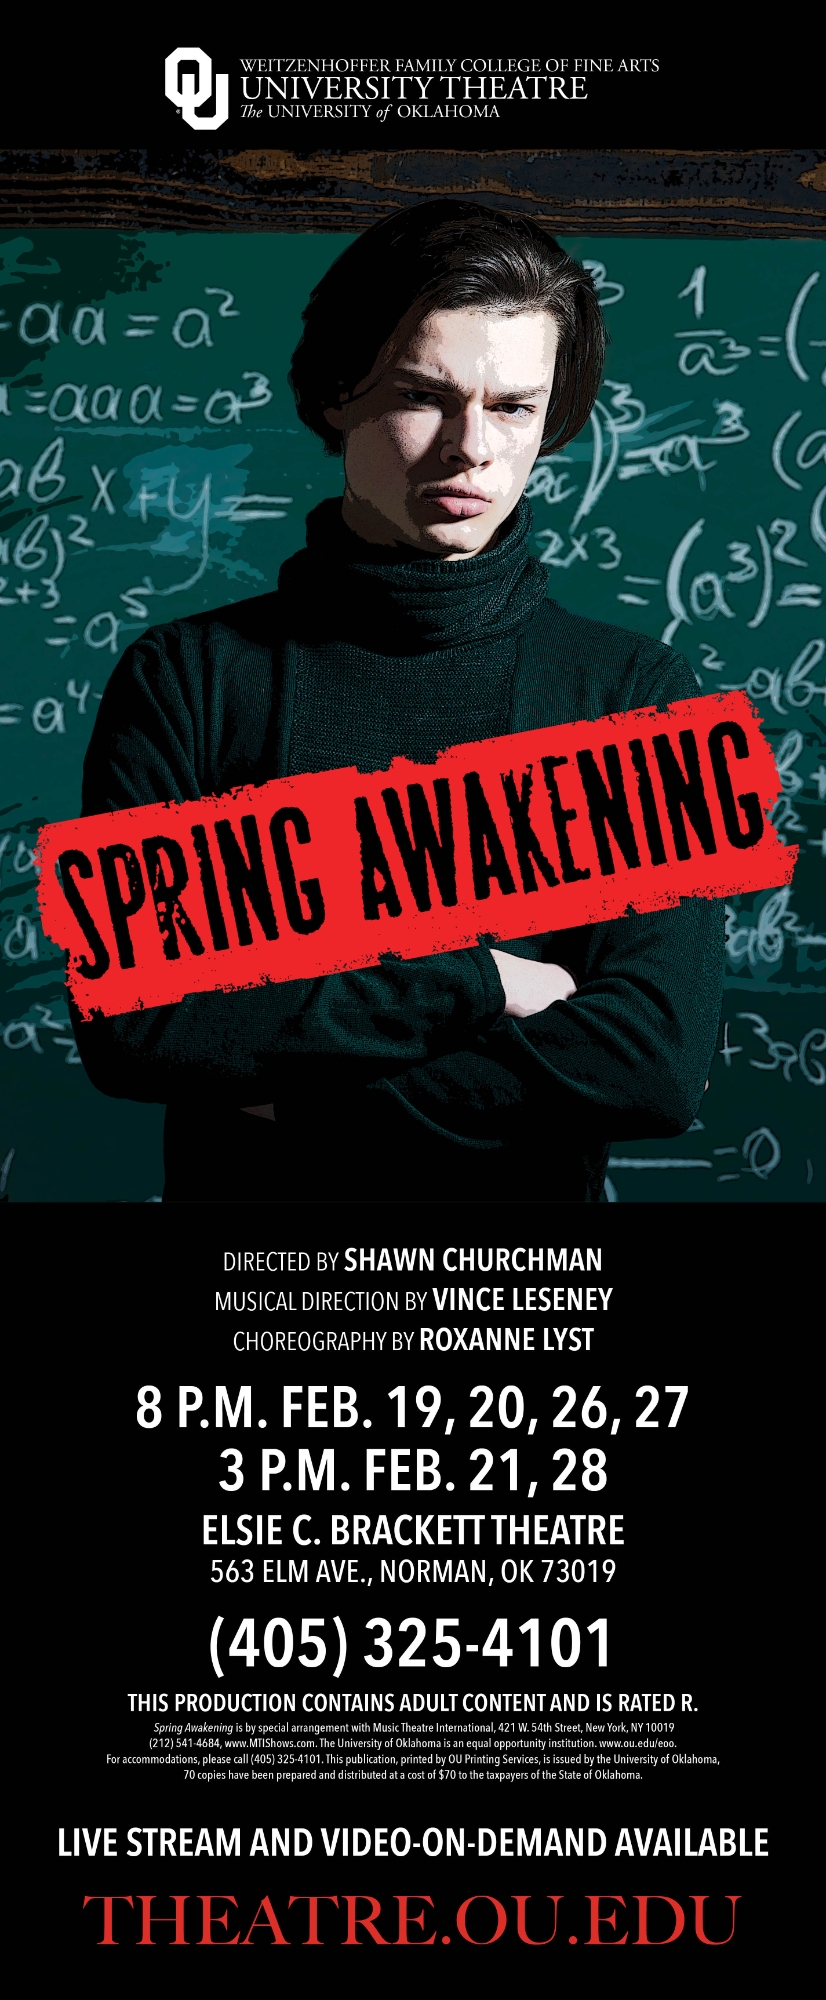 OU Weitzenhoffer Family College of Fine Arts, University Theatre, The University of Oklahoma. Spring Awakening. Directed by Shawn Churchman, Musical Direction by Vince Leseney, Choreography by Roxanne Lyst. 8 P.M. Feb. 19, 20, 26, 27; 3 P.M. Feb. 21, 28. Elsie C. Brackett Theatre, 563 Elm Ave., Norman, OK 73019. (405) 325-4101. This production contains adult content and is rated R. Spring Awakening is by special arrangement with Music Theatre International, 421 W. 54th Street, New York, NY 10019. (212) 541-4684, www.MTIShows.com. The University of Oklahoma is an equal opportunity institution. www.ou.edu/eoo. For accommodations, please call (405) 325-4101. This publication, printed by OU Printing Services, is issued by the University of Oklahoma, 70 copies have been prepared and distributed at a cost of $70 to the taxpayers of the State of Oklahoma. Live stream and video-on-demand available. theatre.ou.edu.